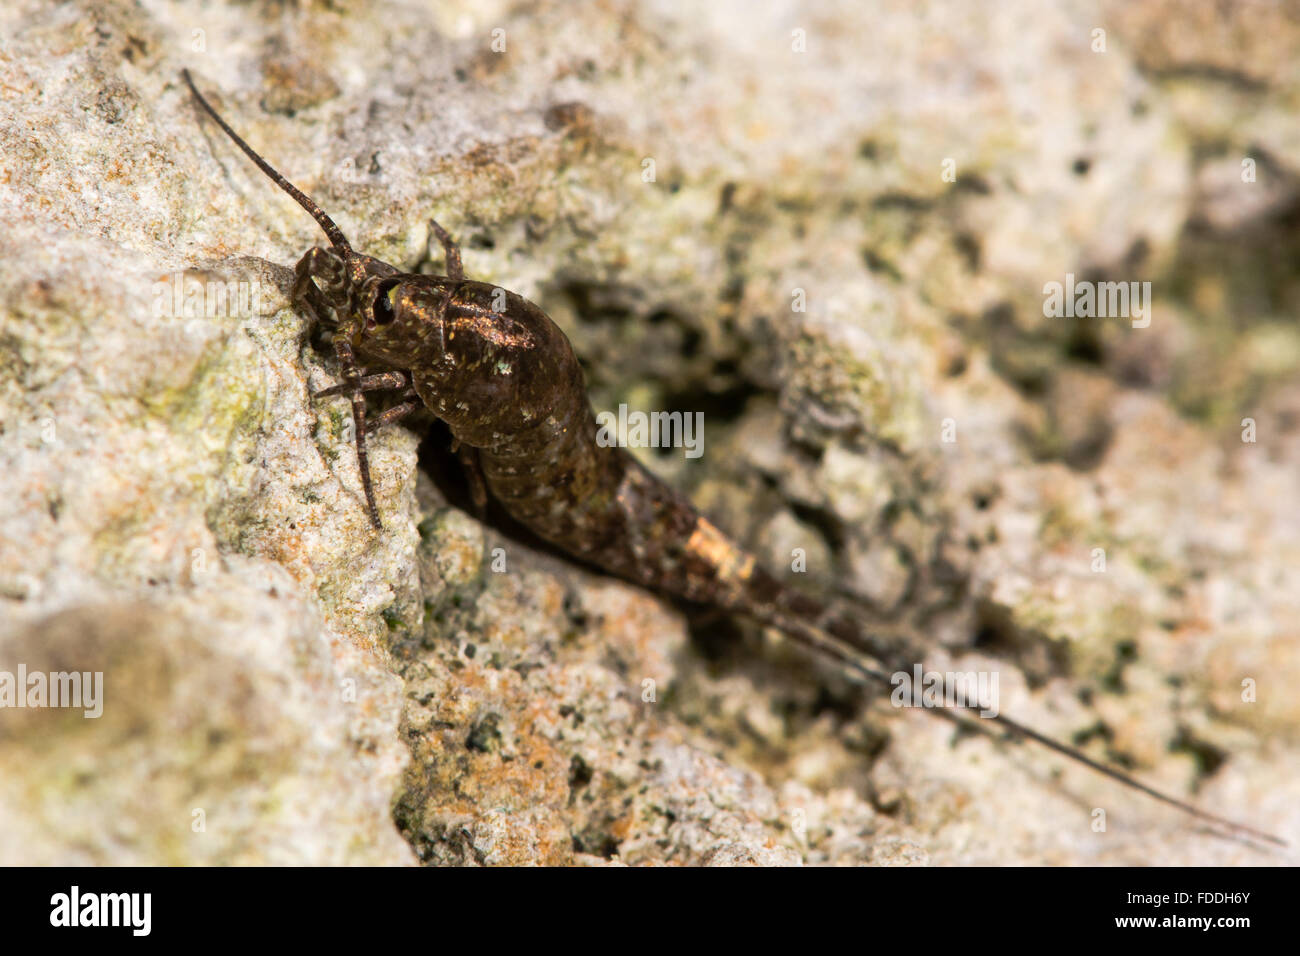 Dilta hibernica bristletail, a primitive insect. A wingless insect in the family Machilidae, order Archaeognatha Stock Photo